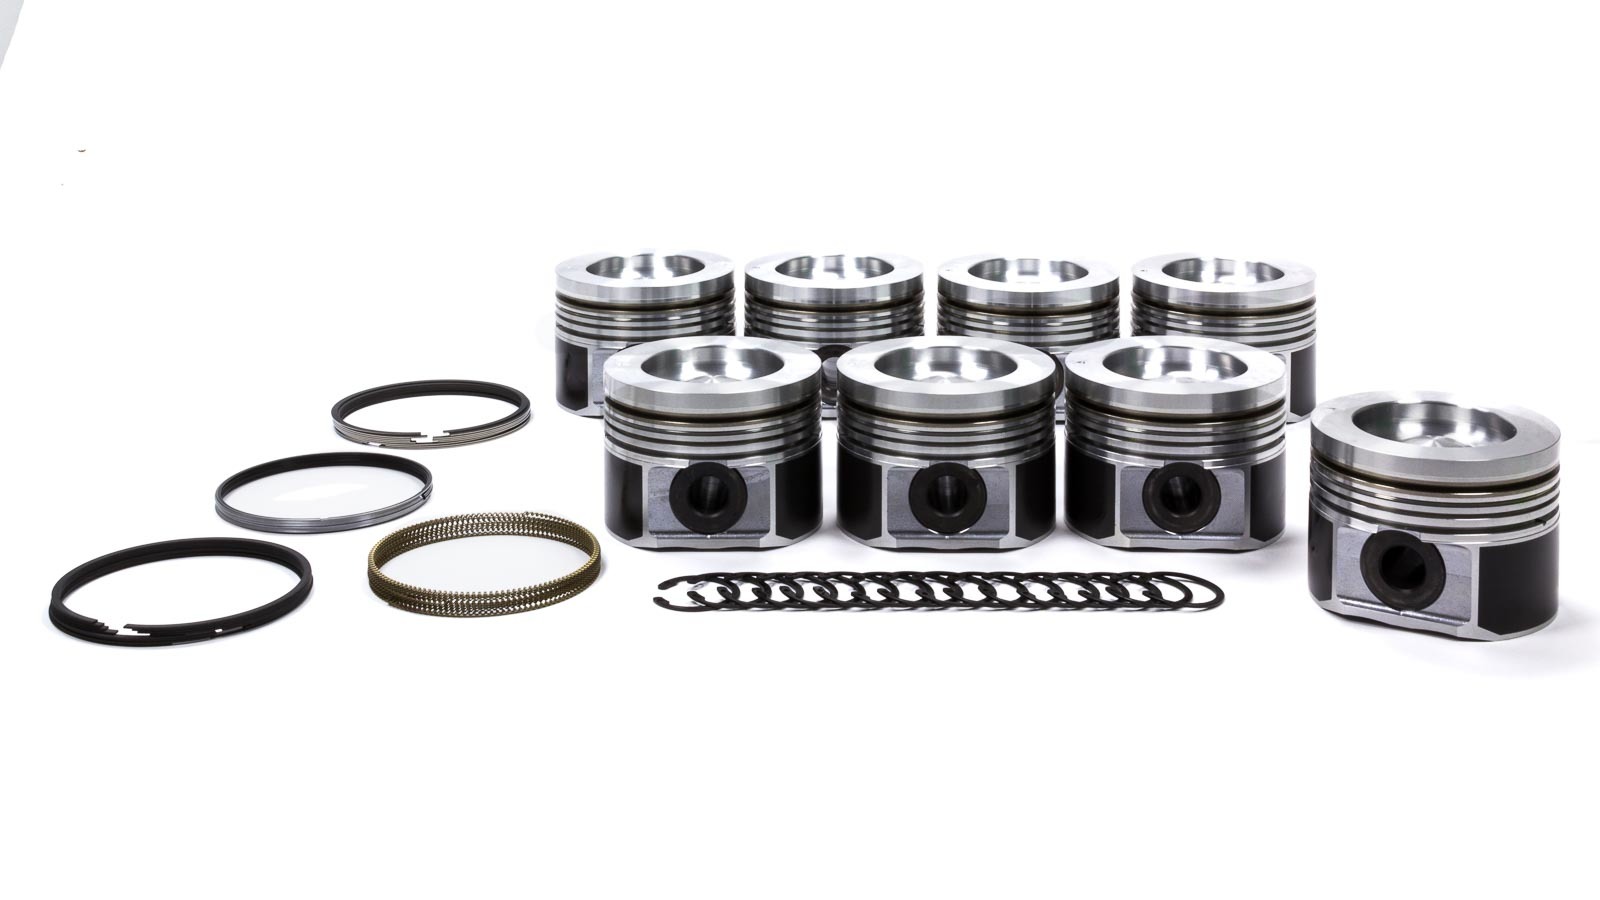 Mahle Pistons 930036075 Piston and Ring, PowerPak, Cast, 4.075 in Bore, 3.0 x 2.0 x 3.0 mm Ring Groove, Minus 40.70 cc, GM Duramax, Kit